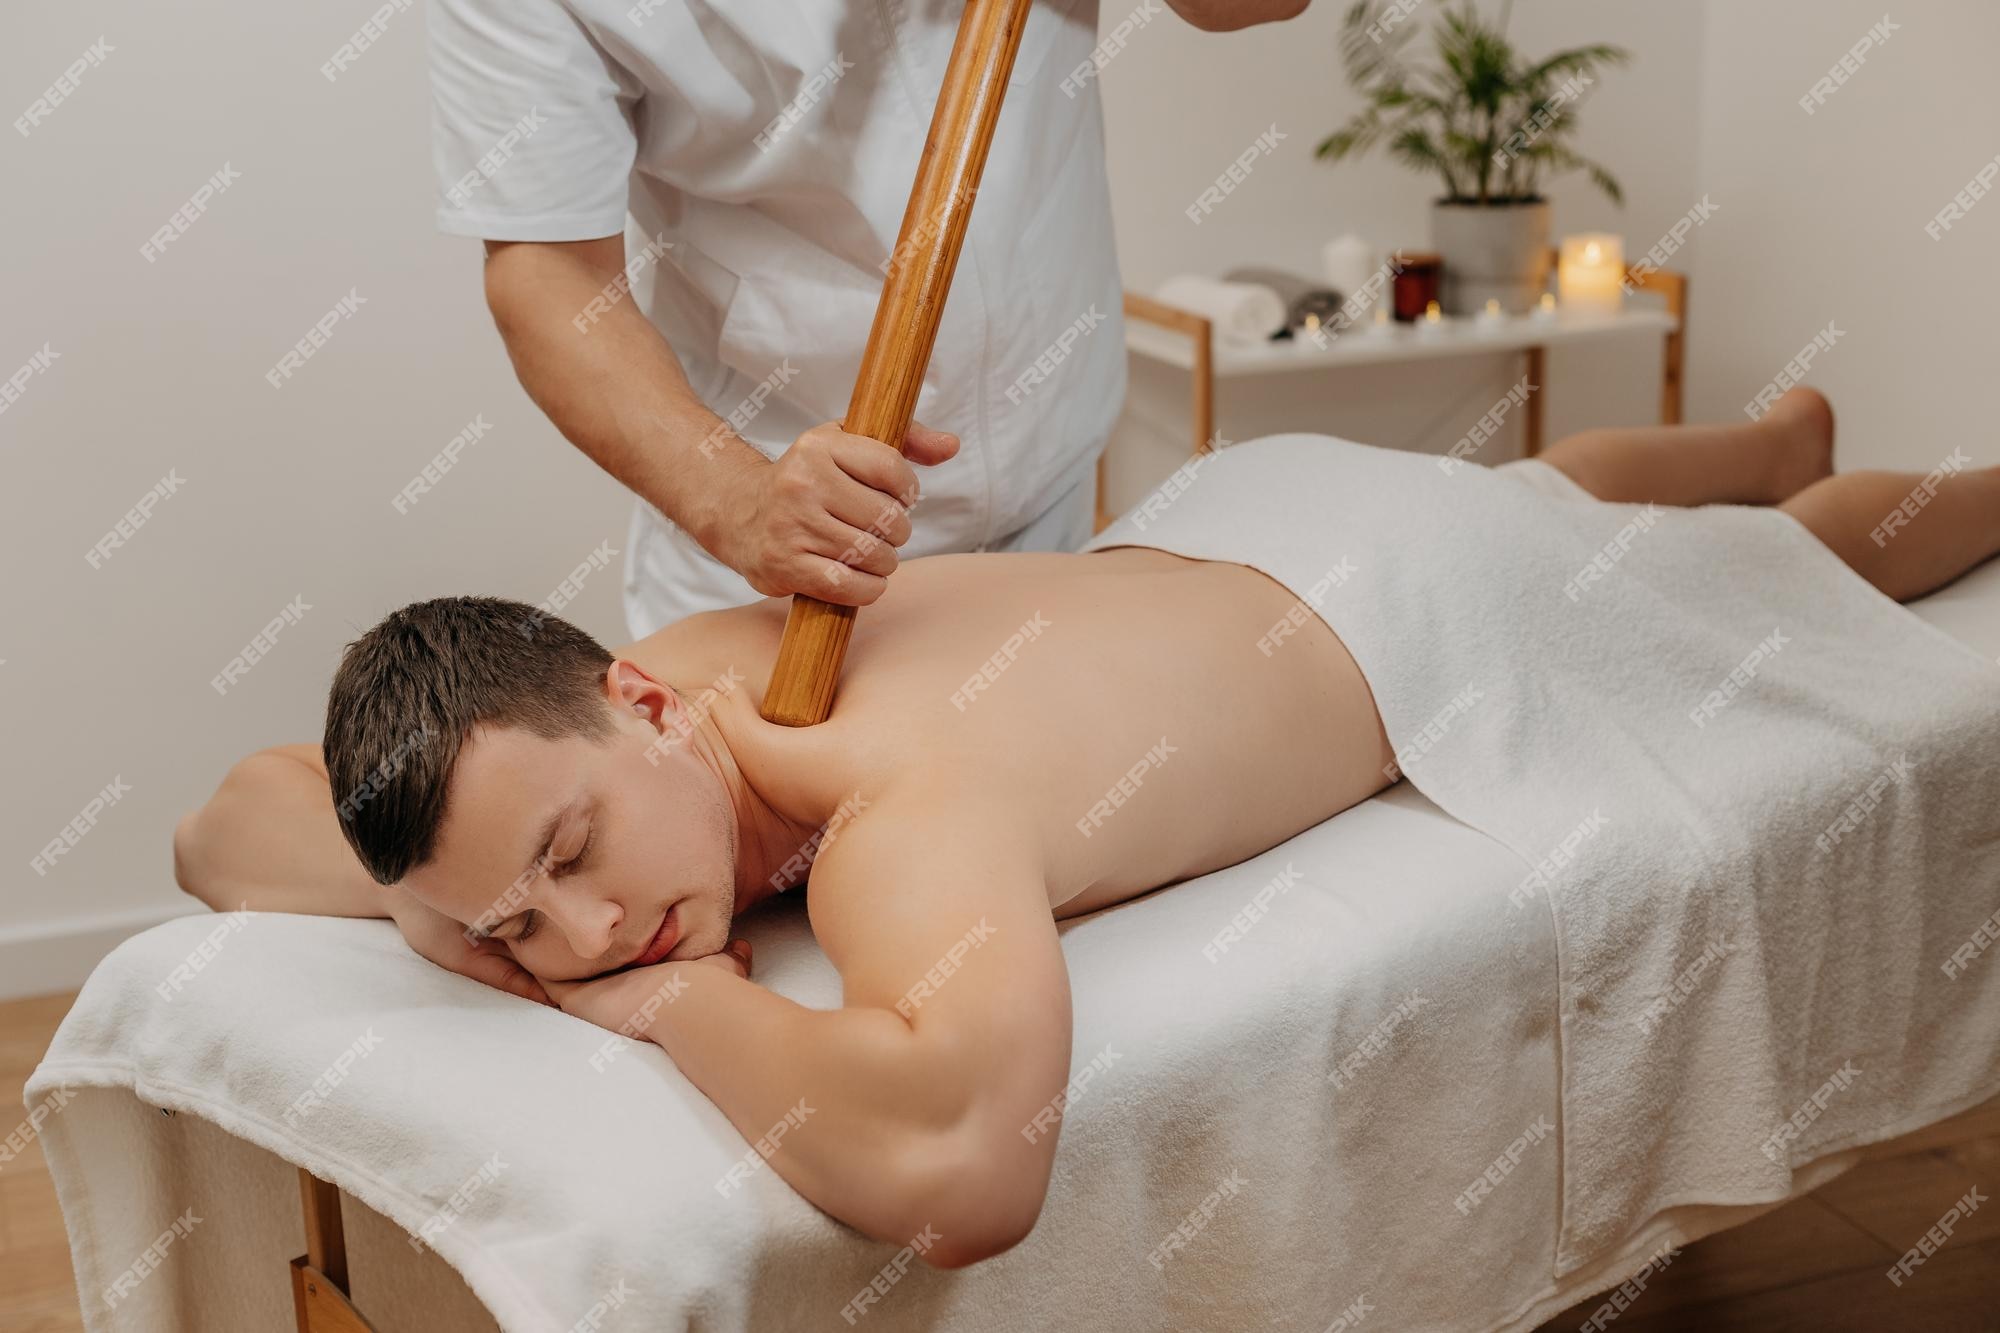  Wat Is Een Traditionele Thaise Massage  thumbnail